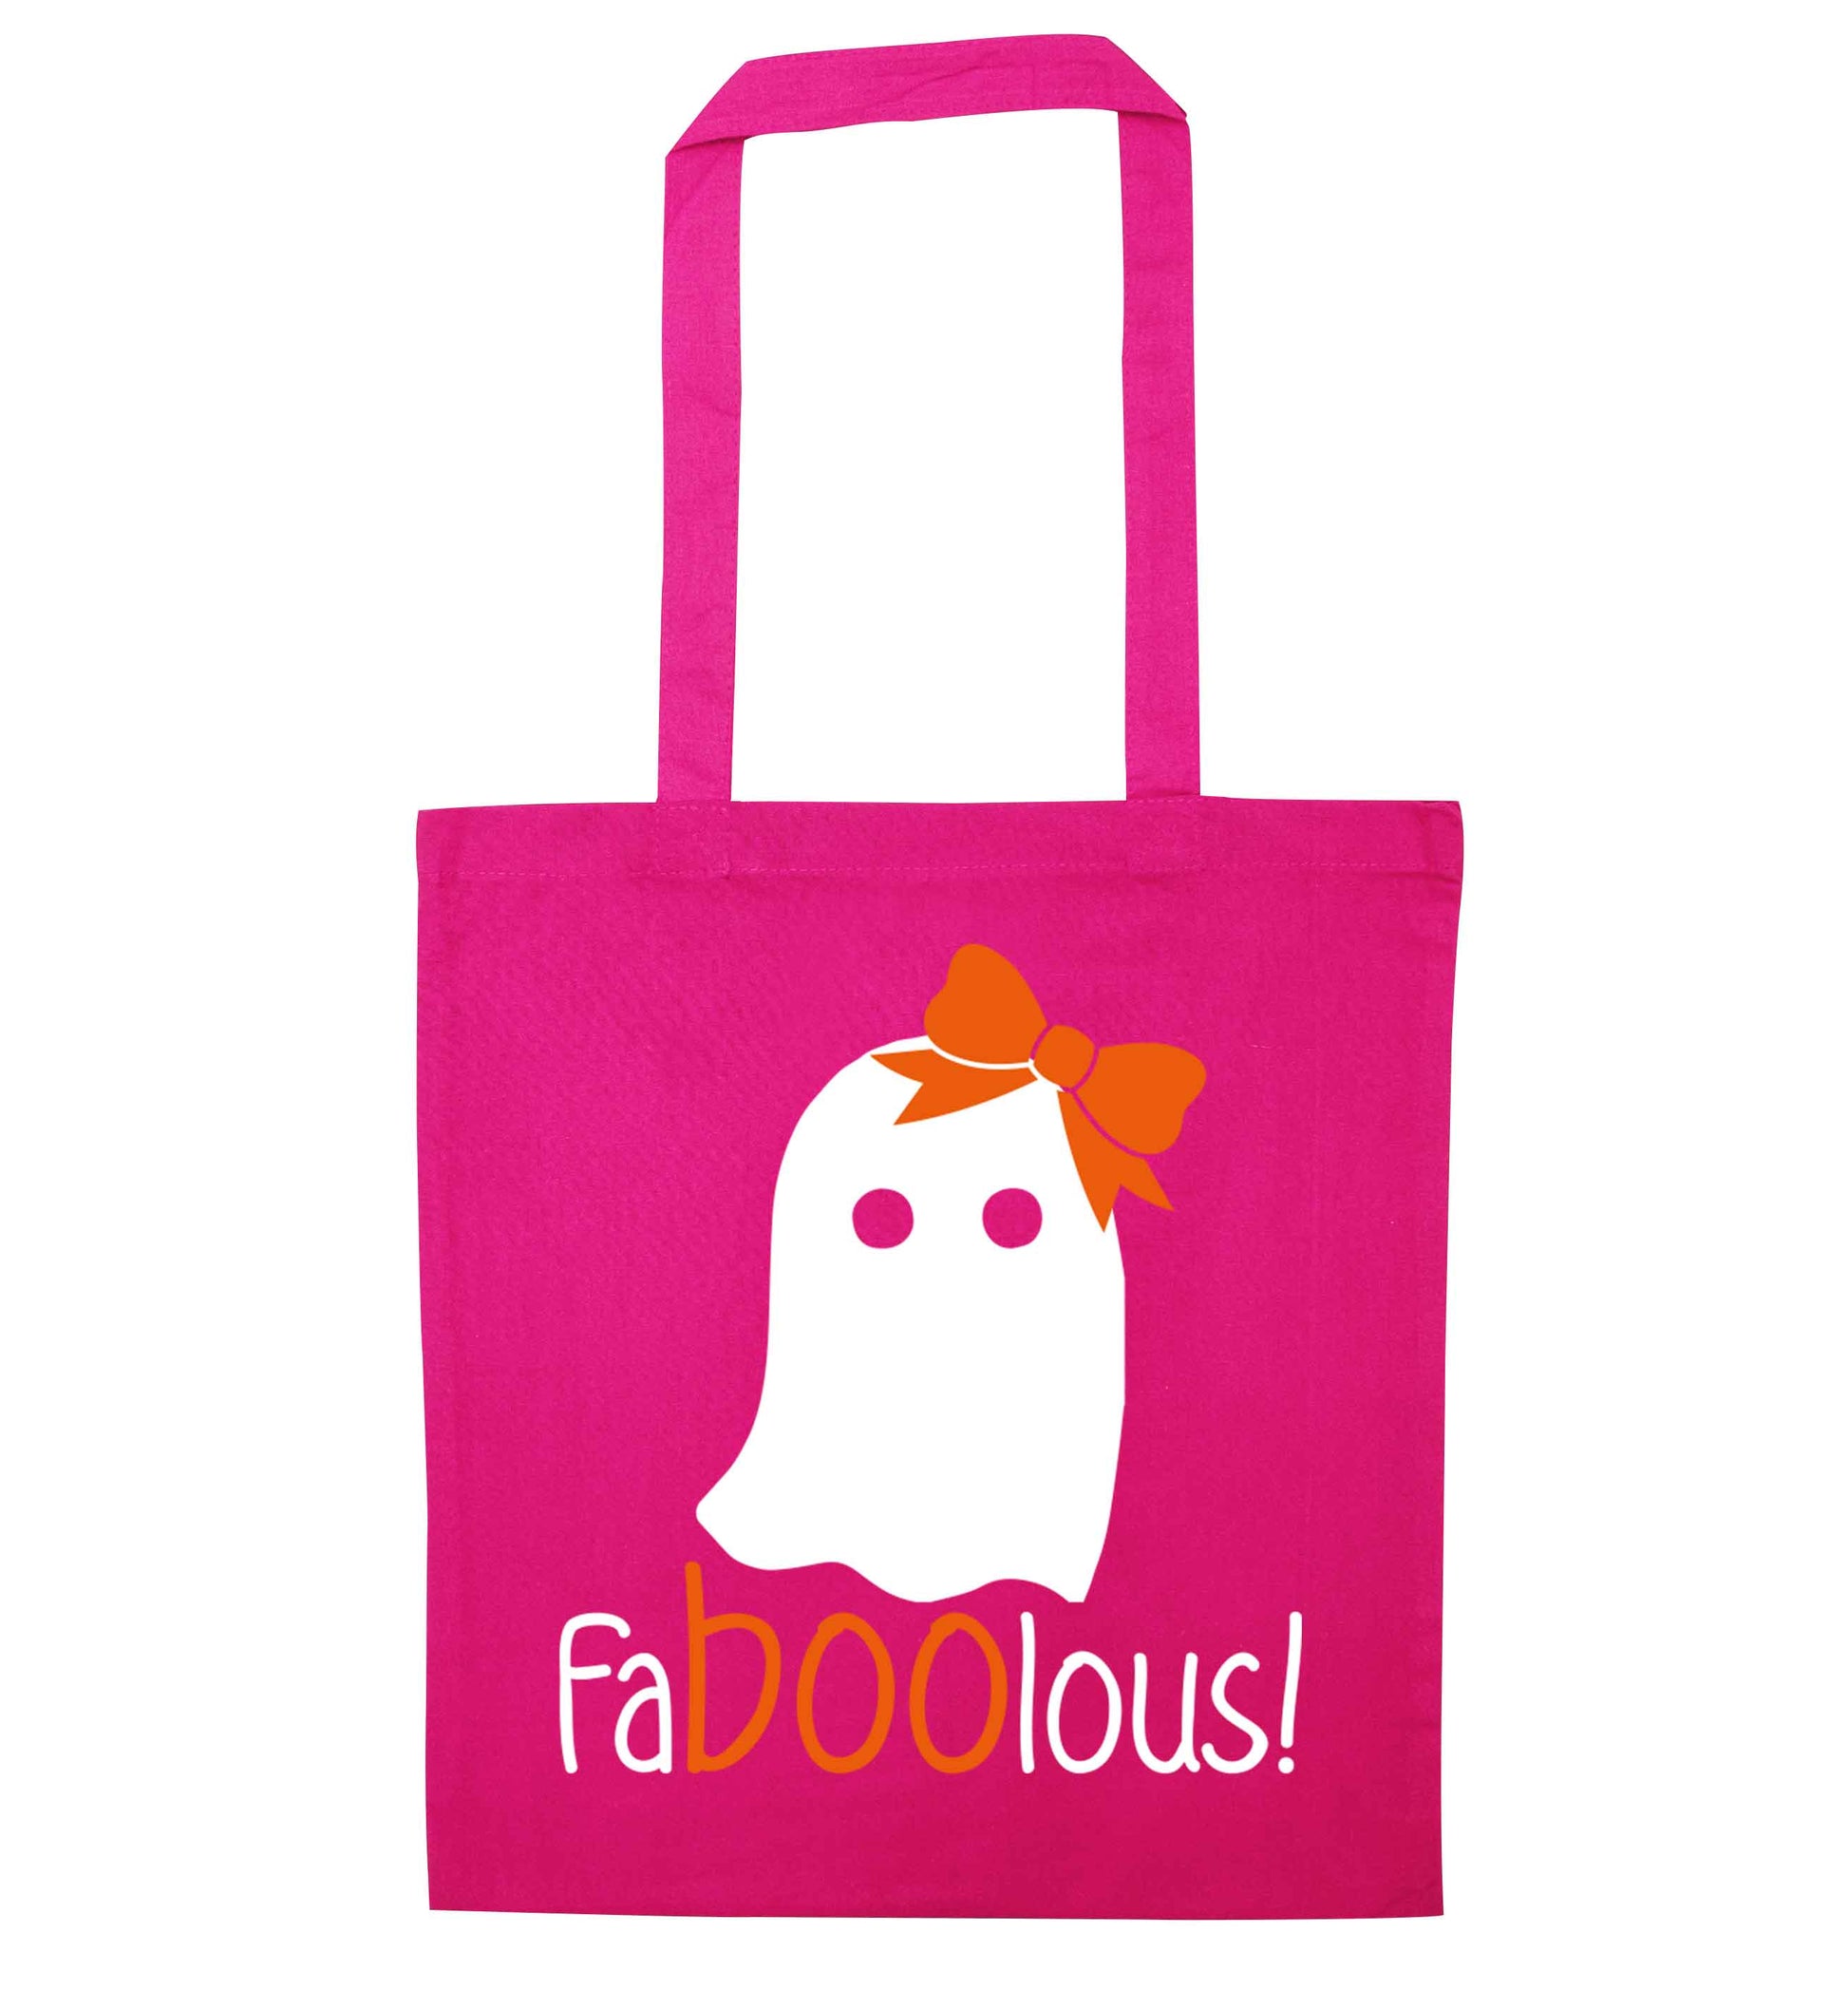 Faboolous ghost pink tote bag